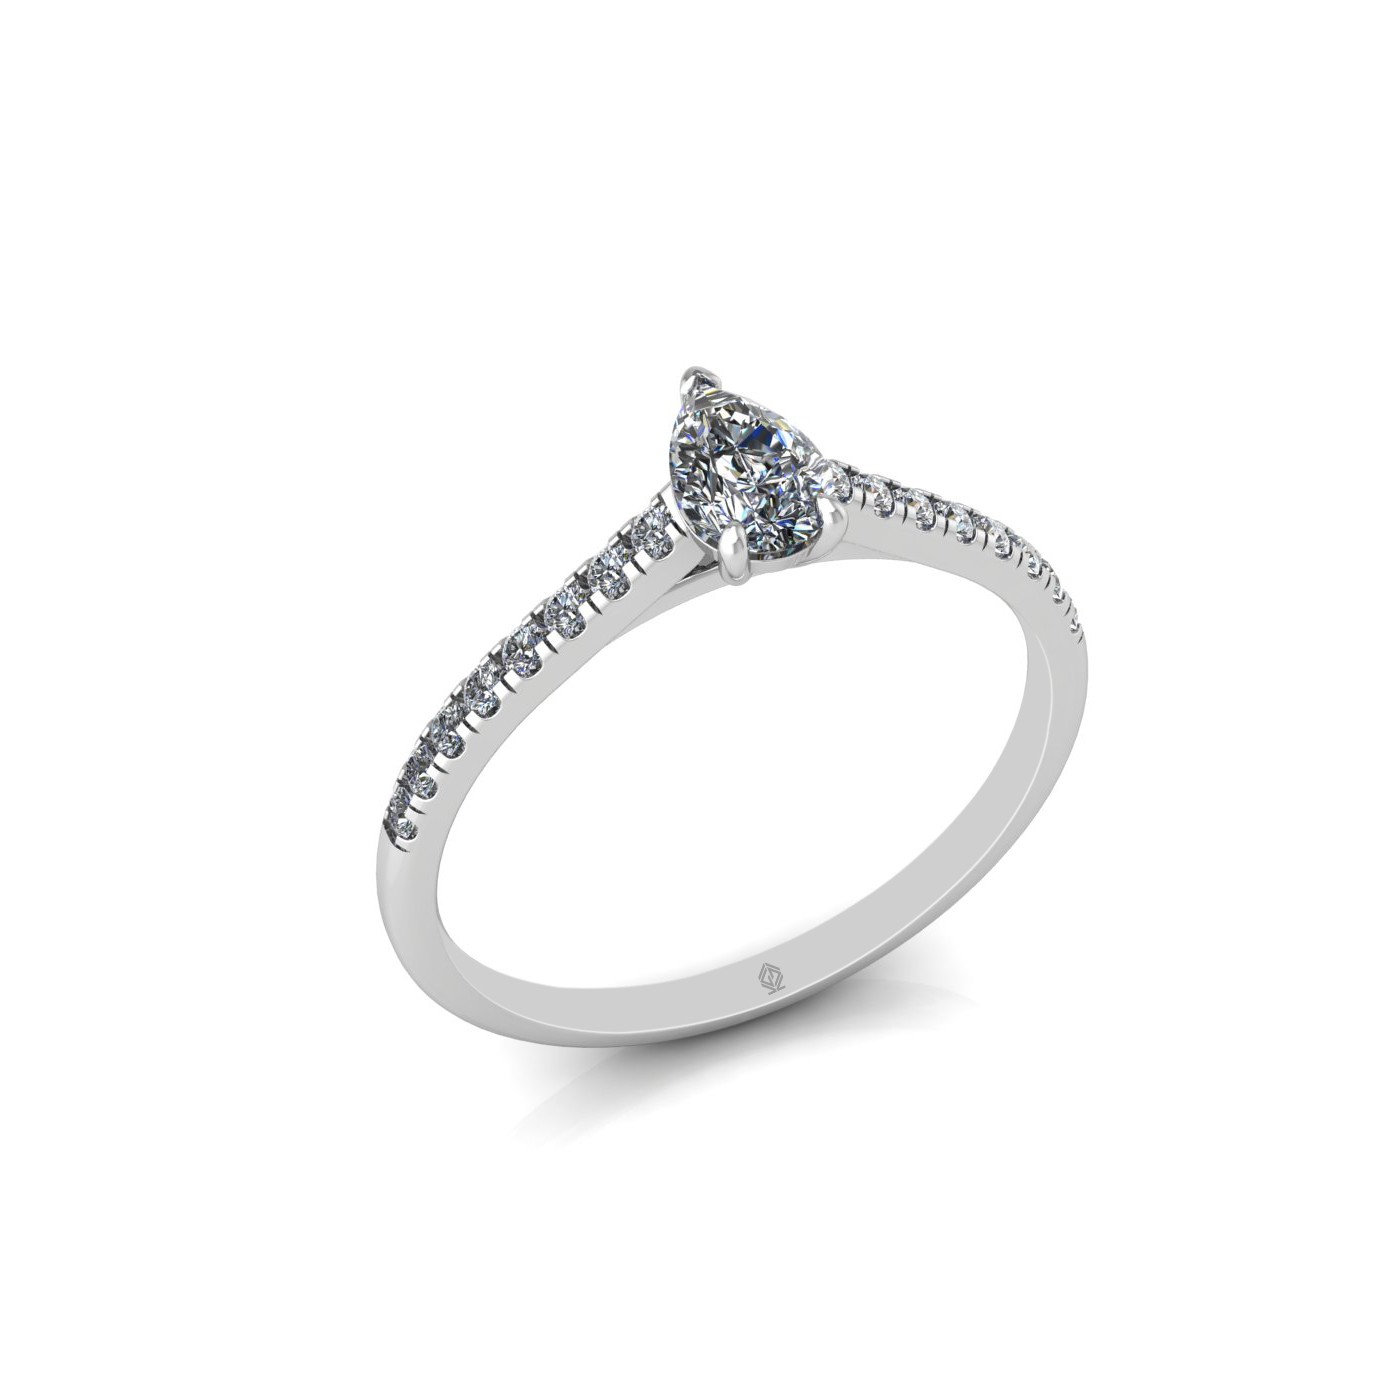 18k white gold  0,30 ct 3 prongs pear diamond engagement ring with whisper thin pavÉ set band